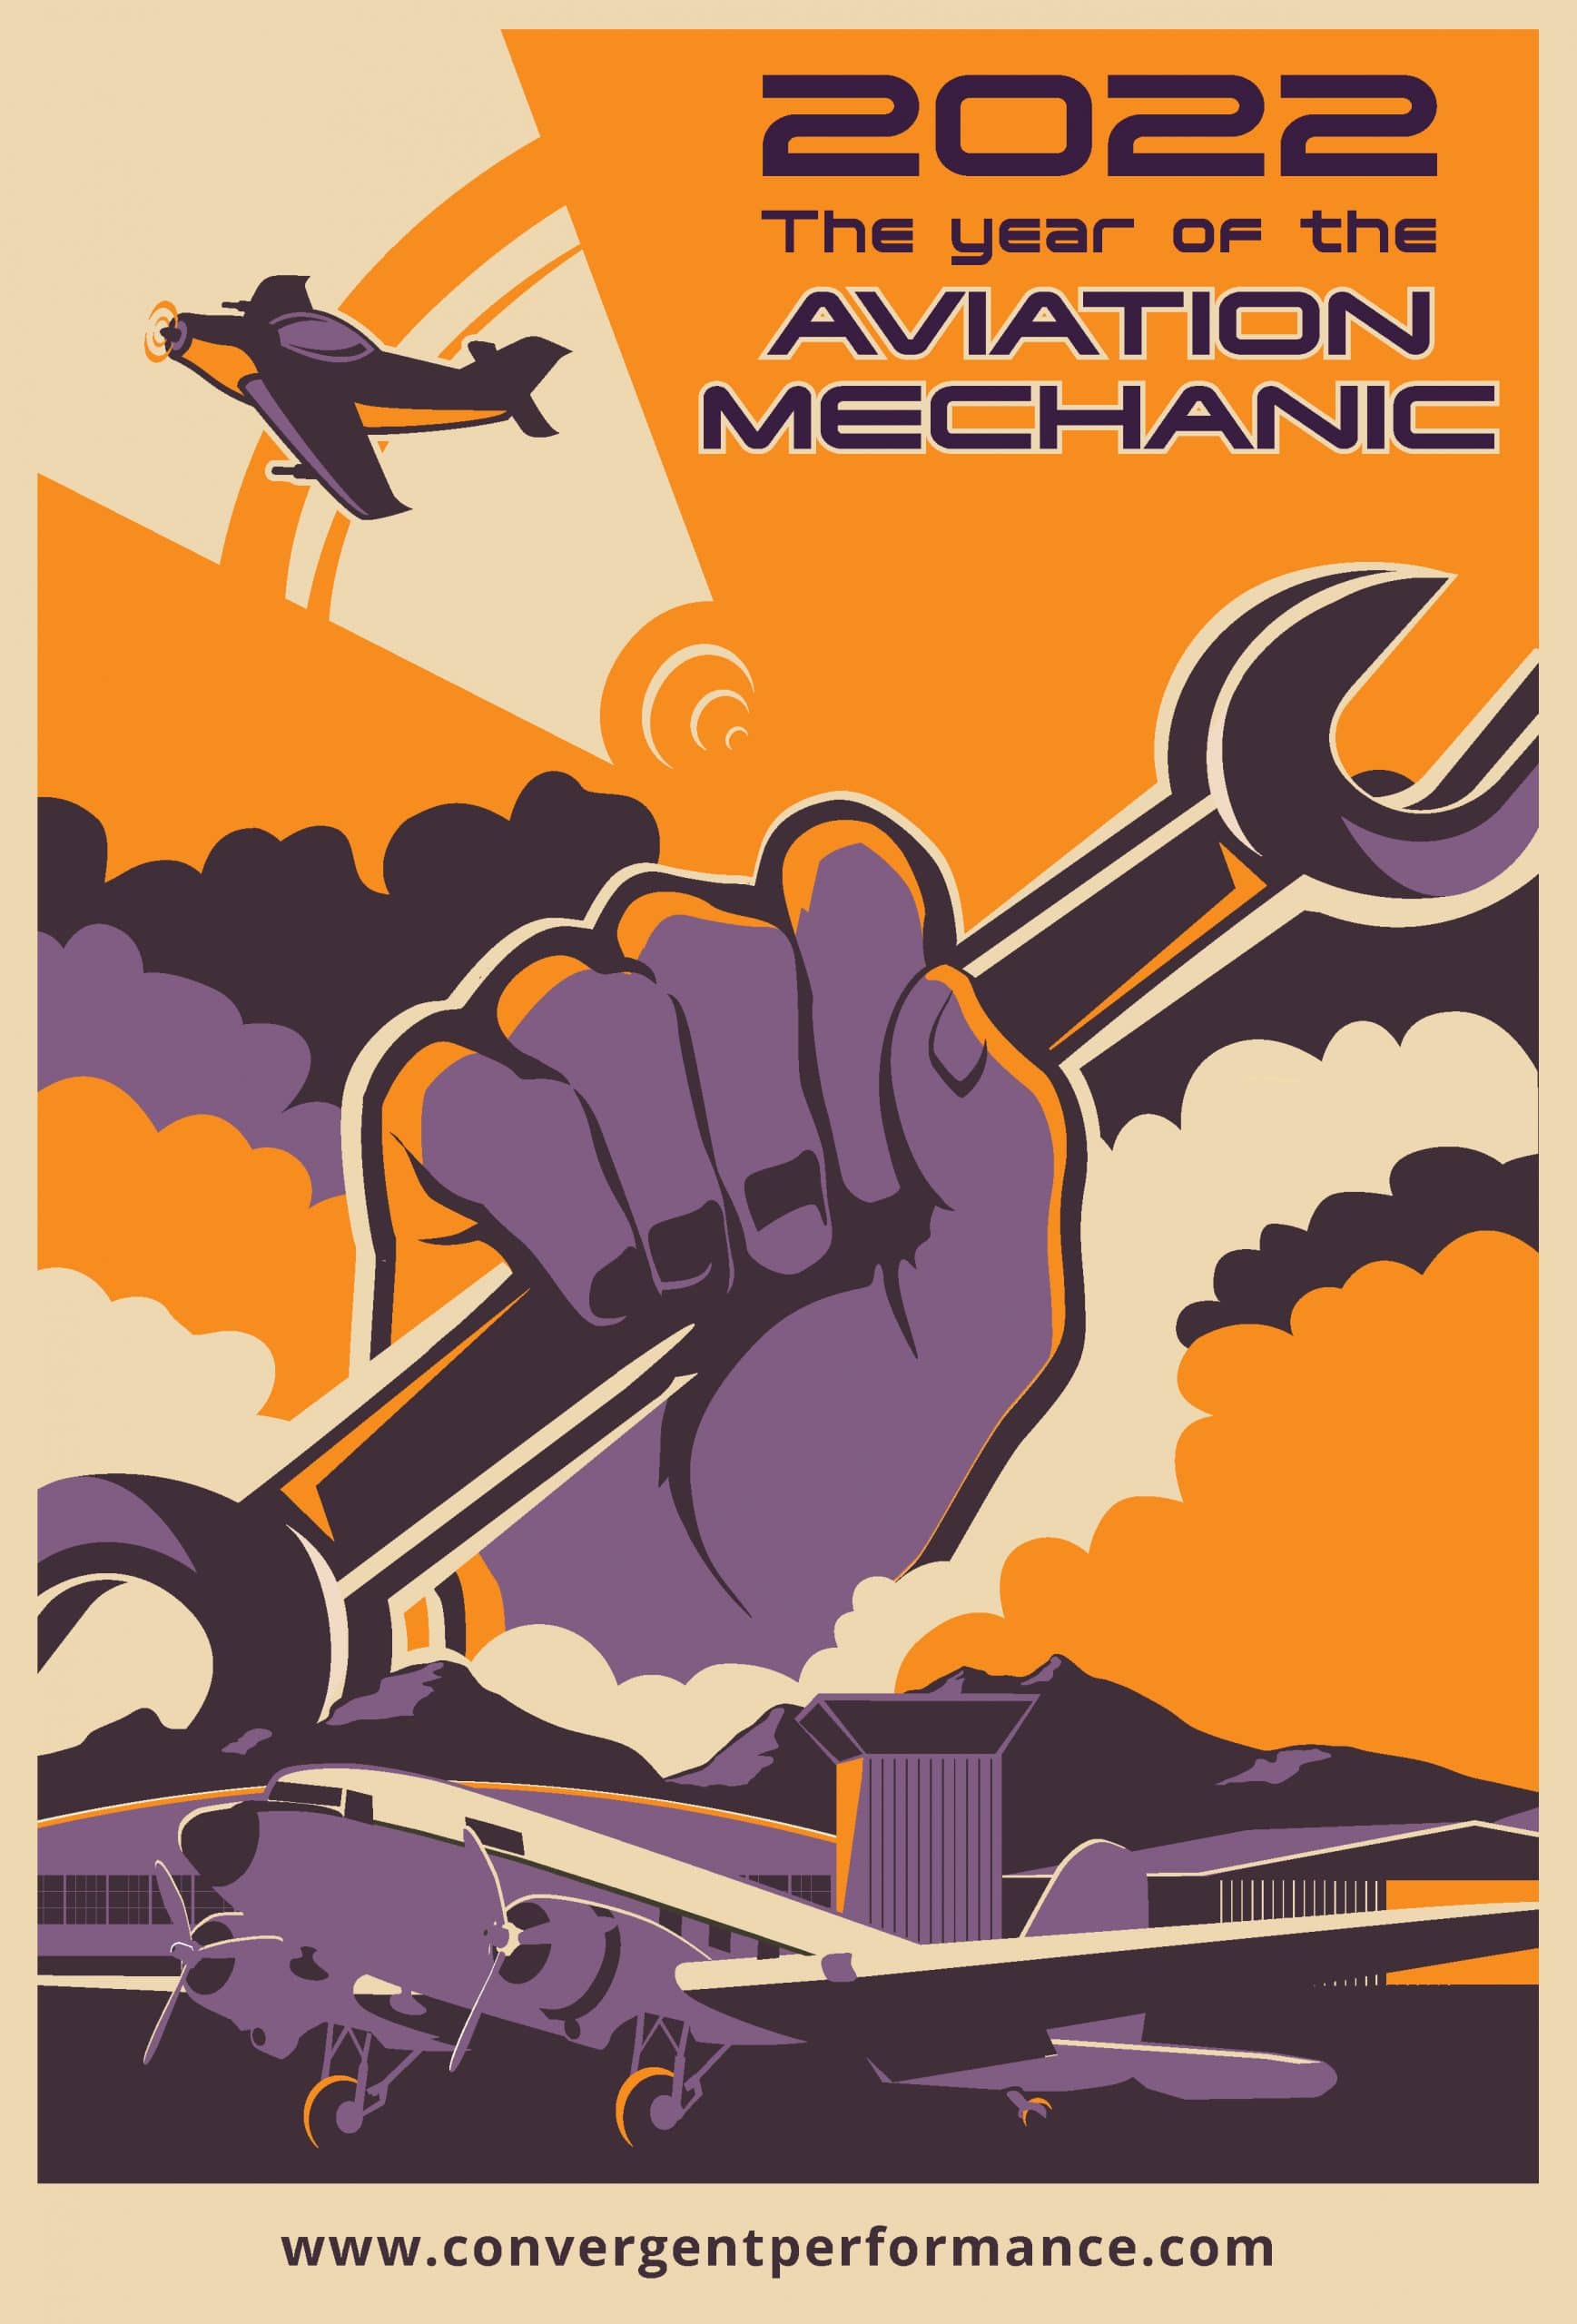 The Year of the Aviation Mechanic